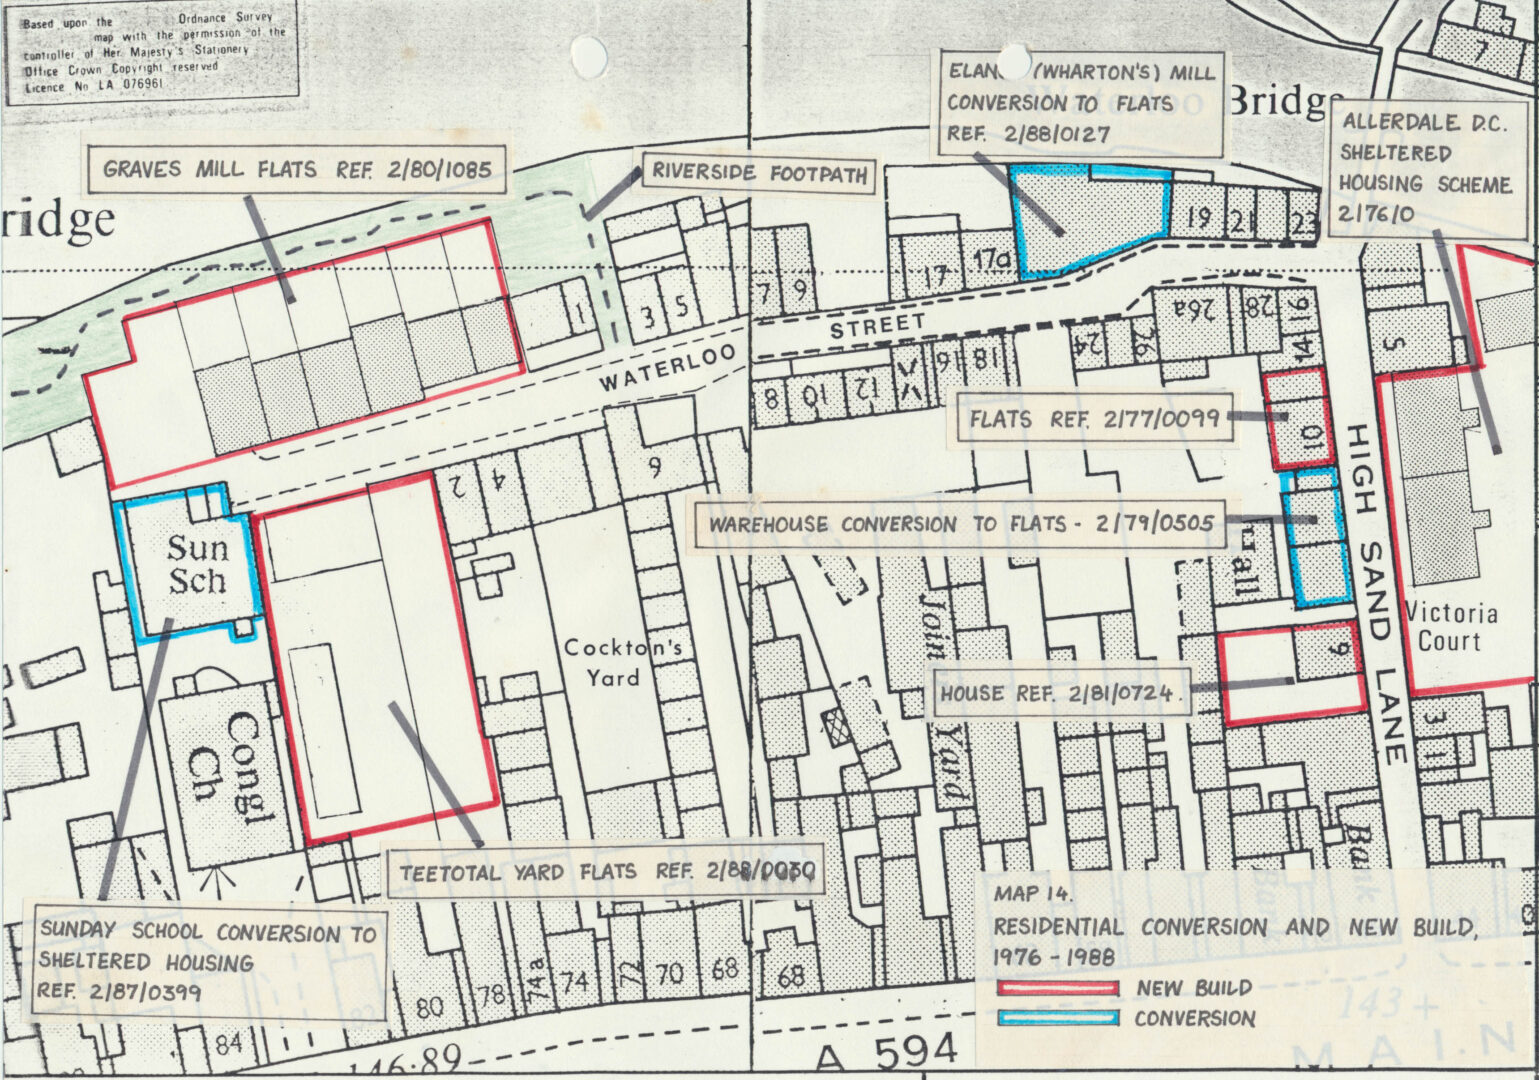 Map 14 Waterloo Street residential conversions and new build proposed 1976 1988 scaled